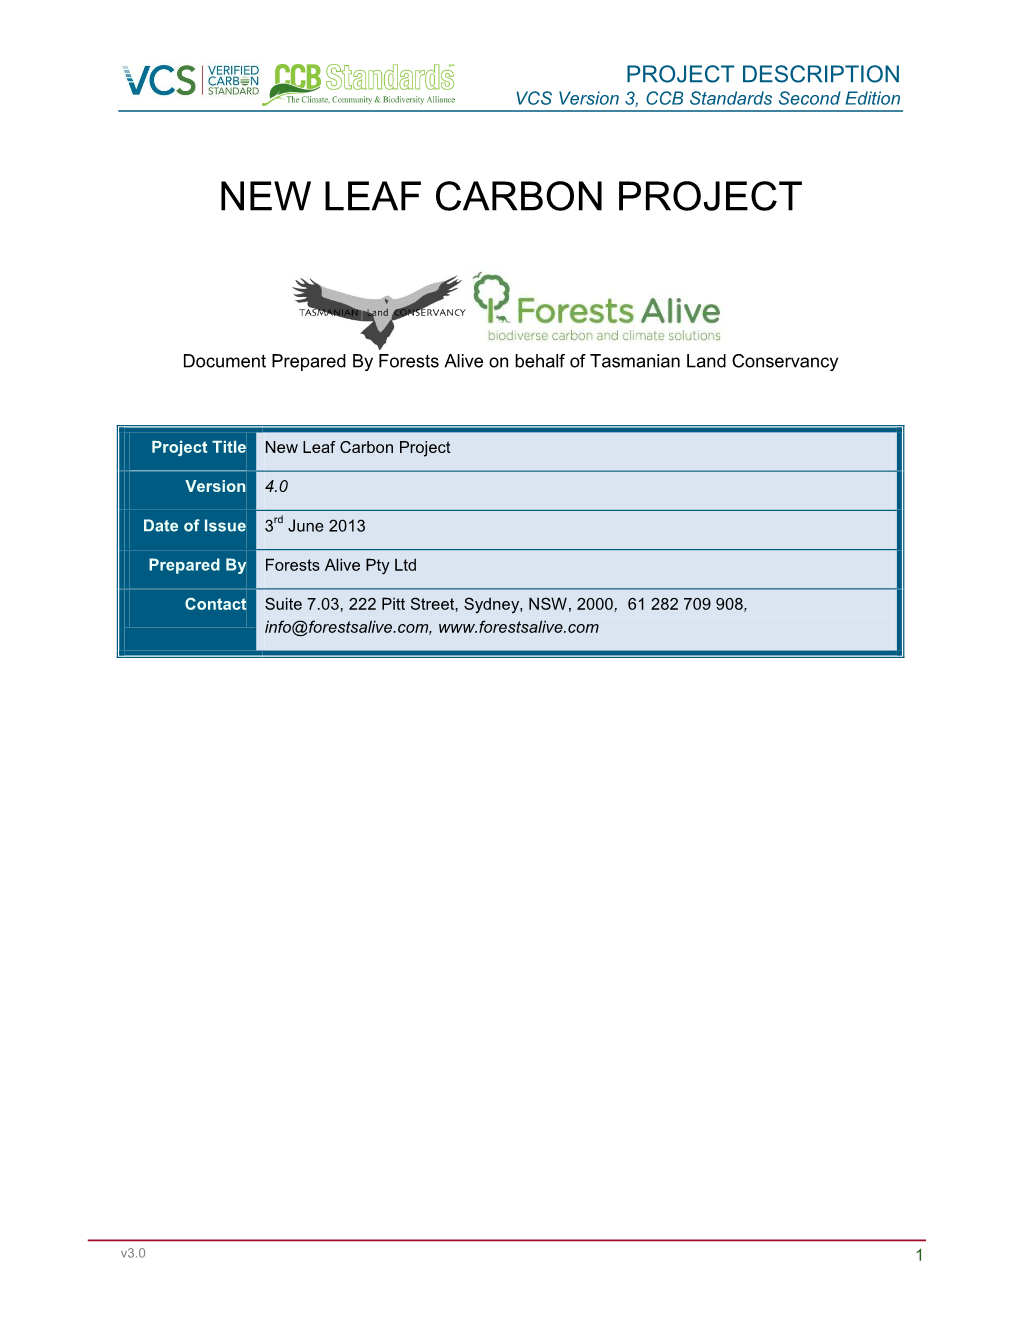 New Leaf Carbon Project